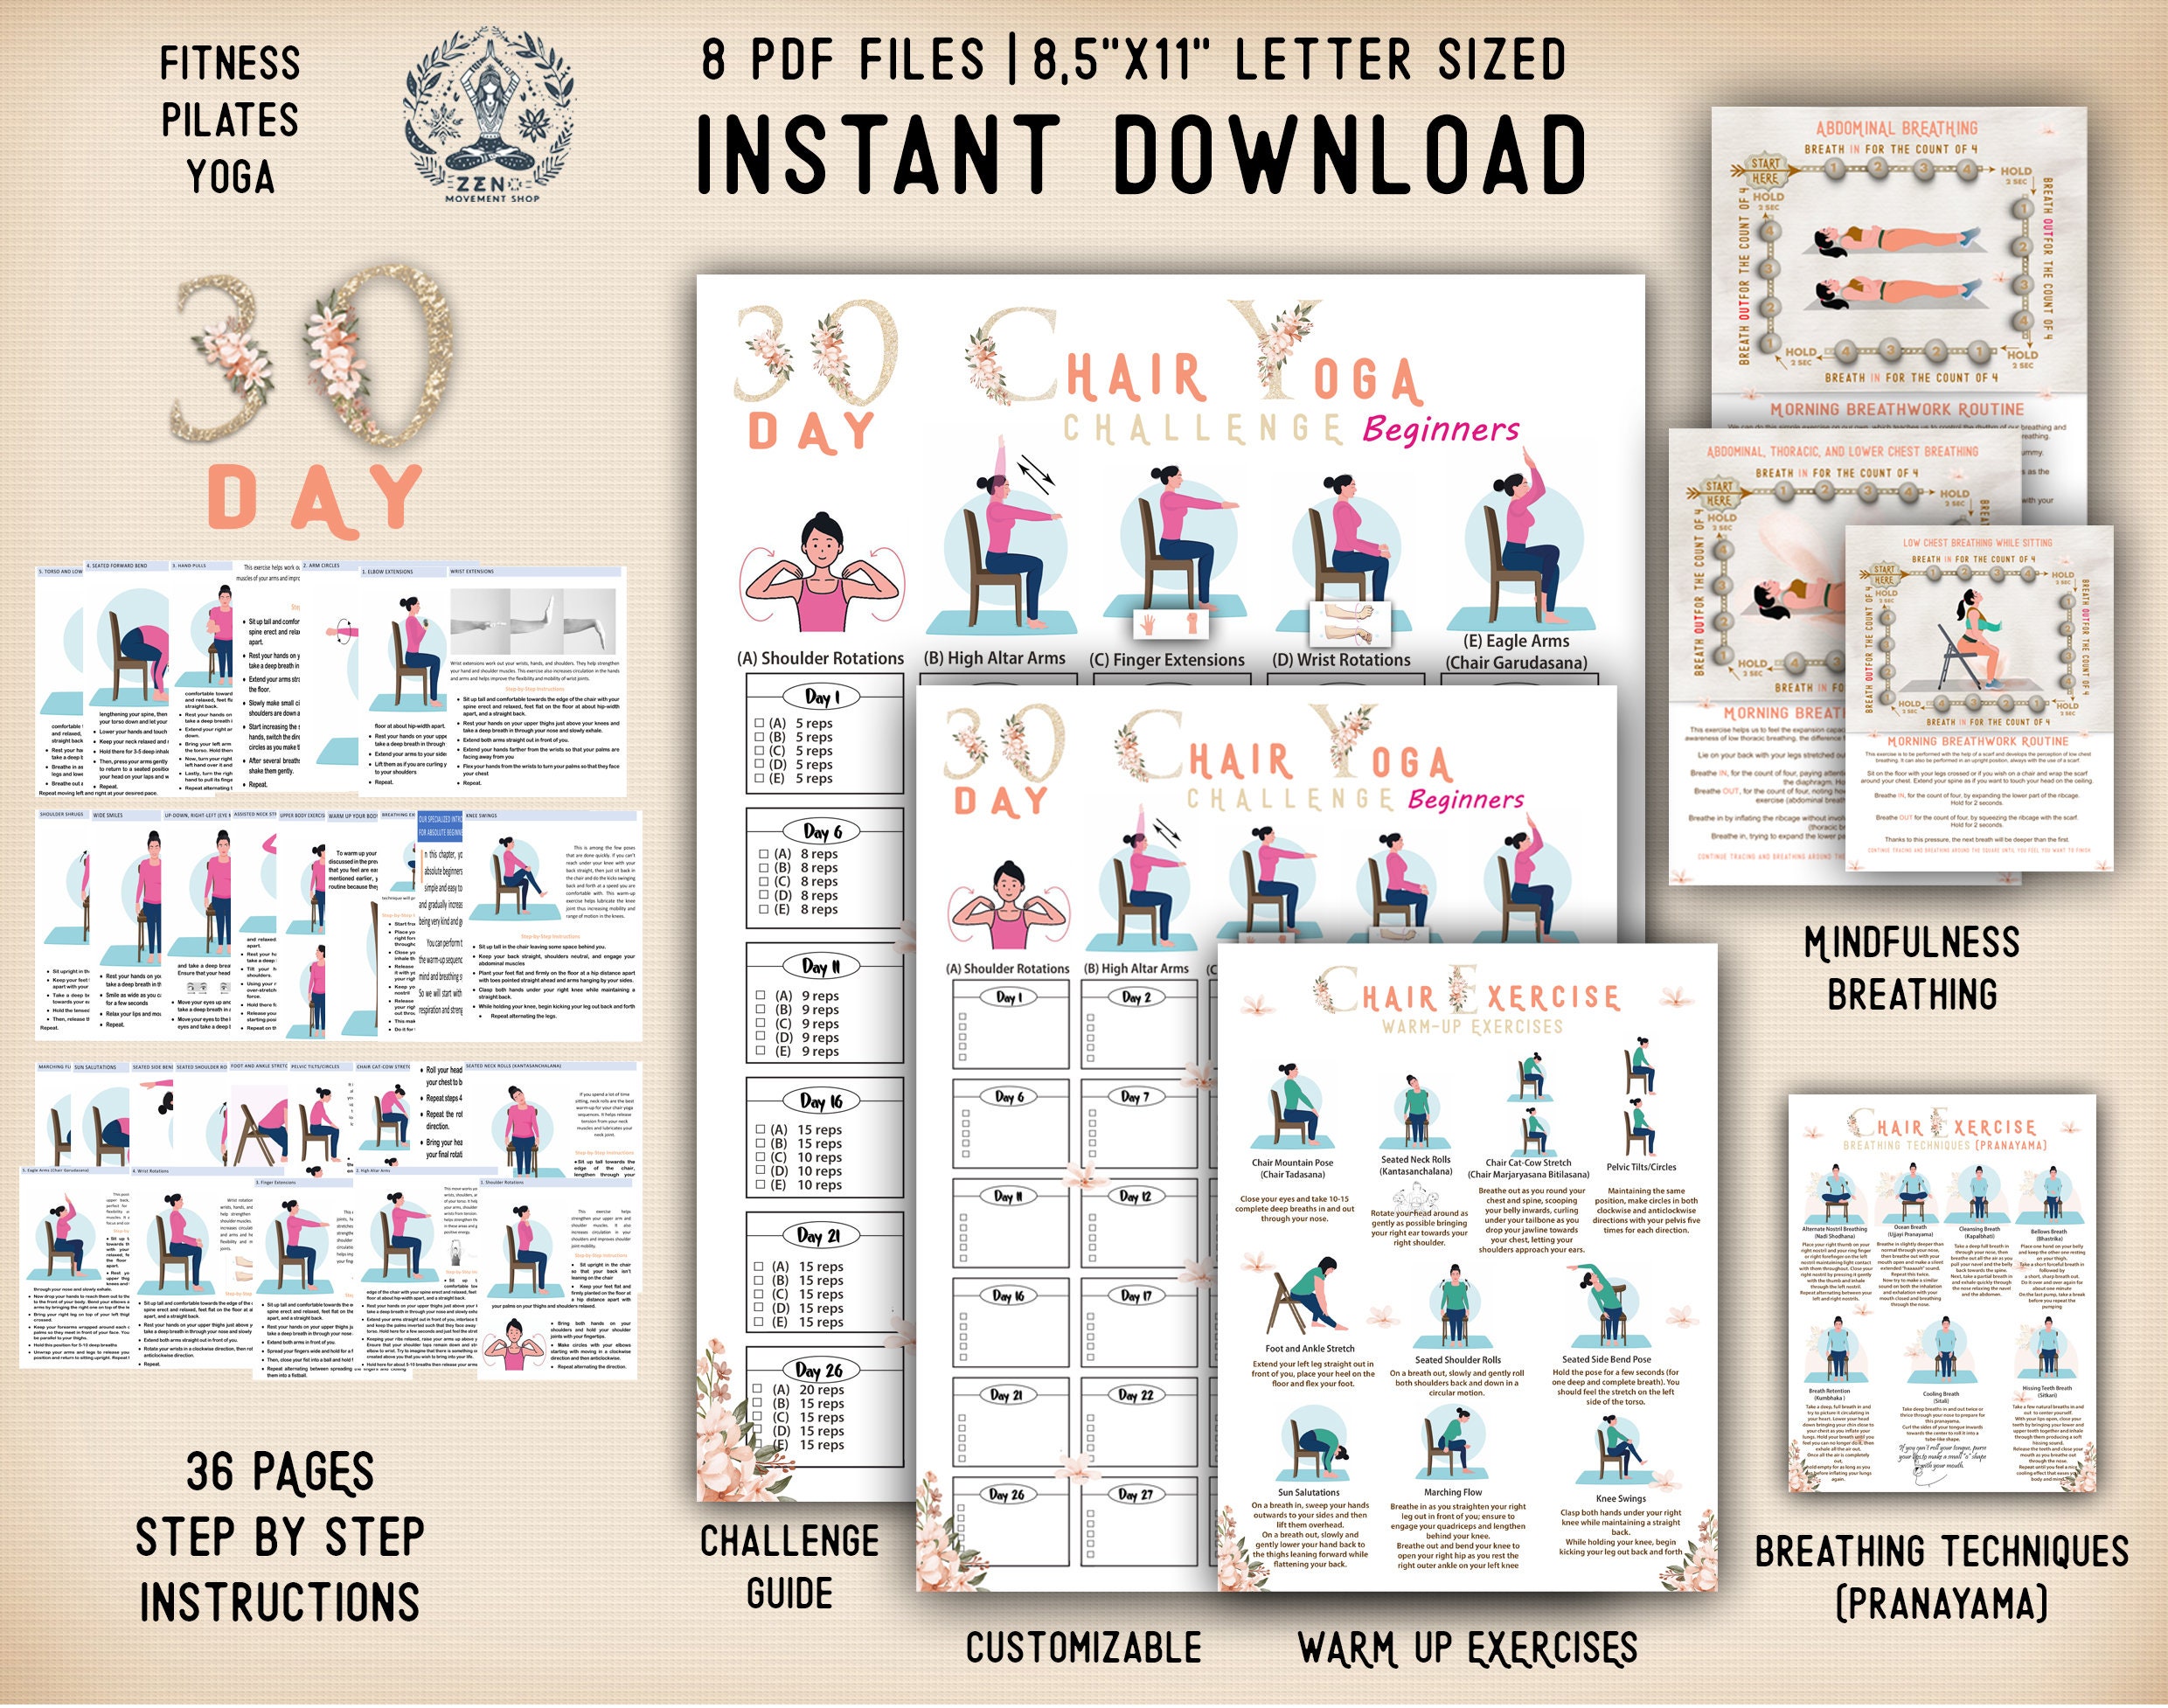 30 Day Chair Workout Challenge Printable Chair Yoga Guide 10 Mins Workout  Planner Digital Digital Office Workout Sitting Workout 